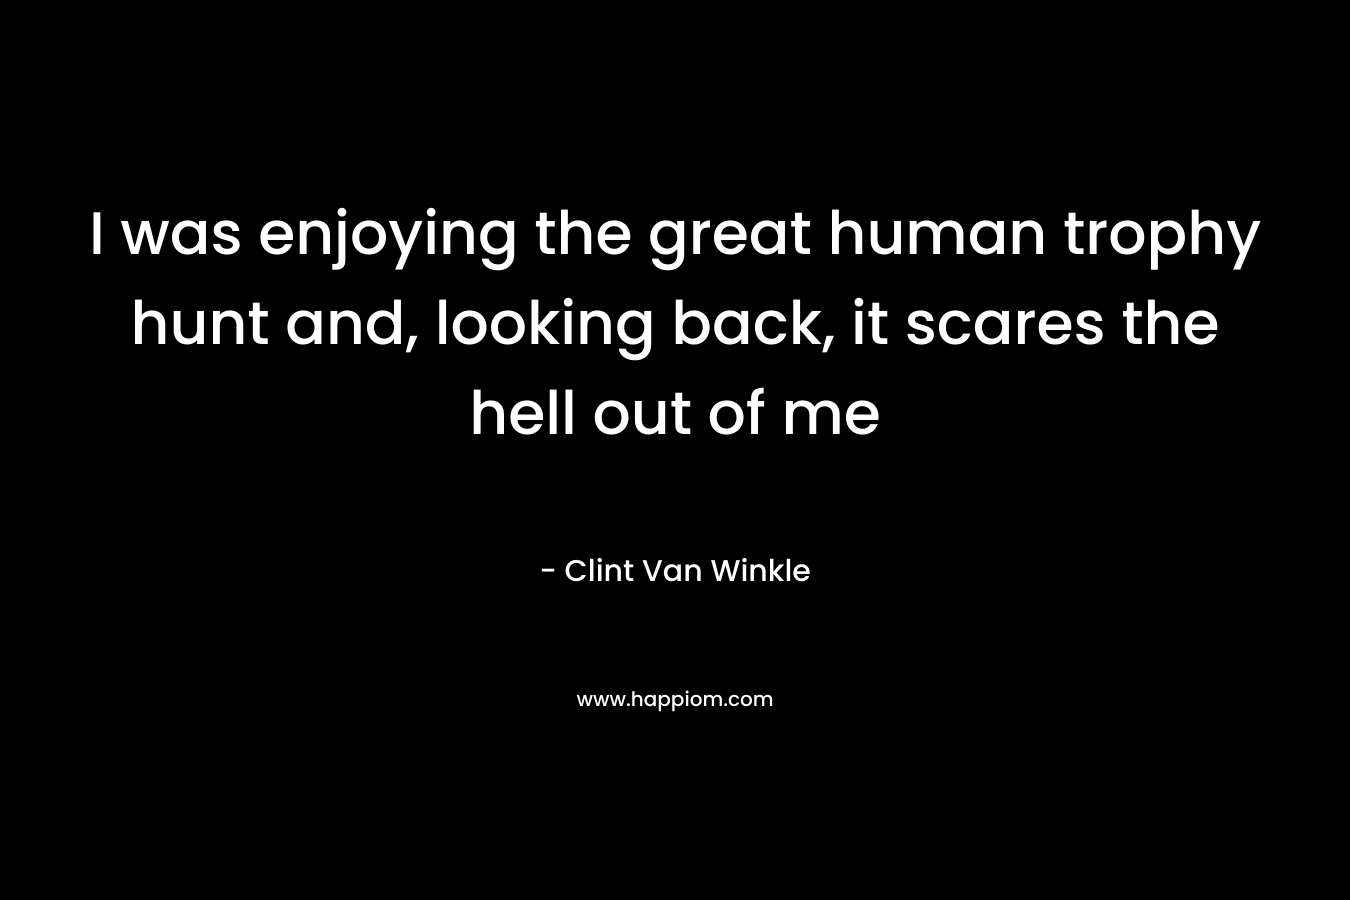 I was enjoying the great human trophy hunt and, looking back, it scares the hell out of me – Clint Van Winkle